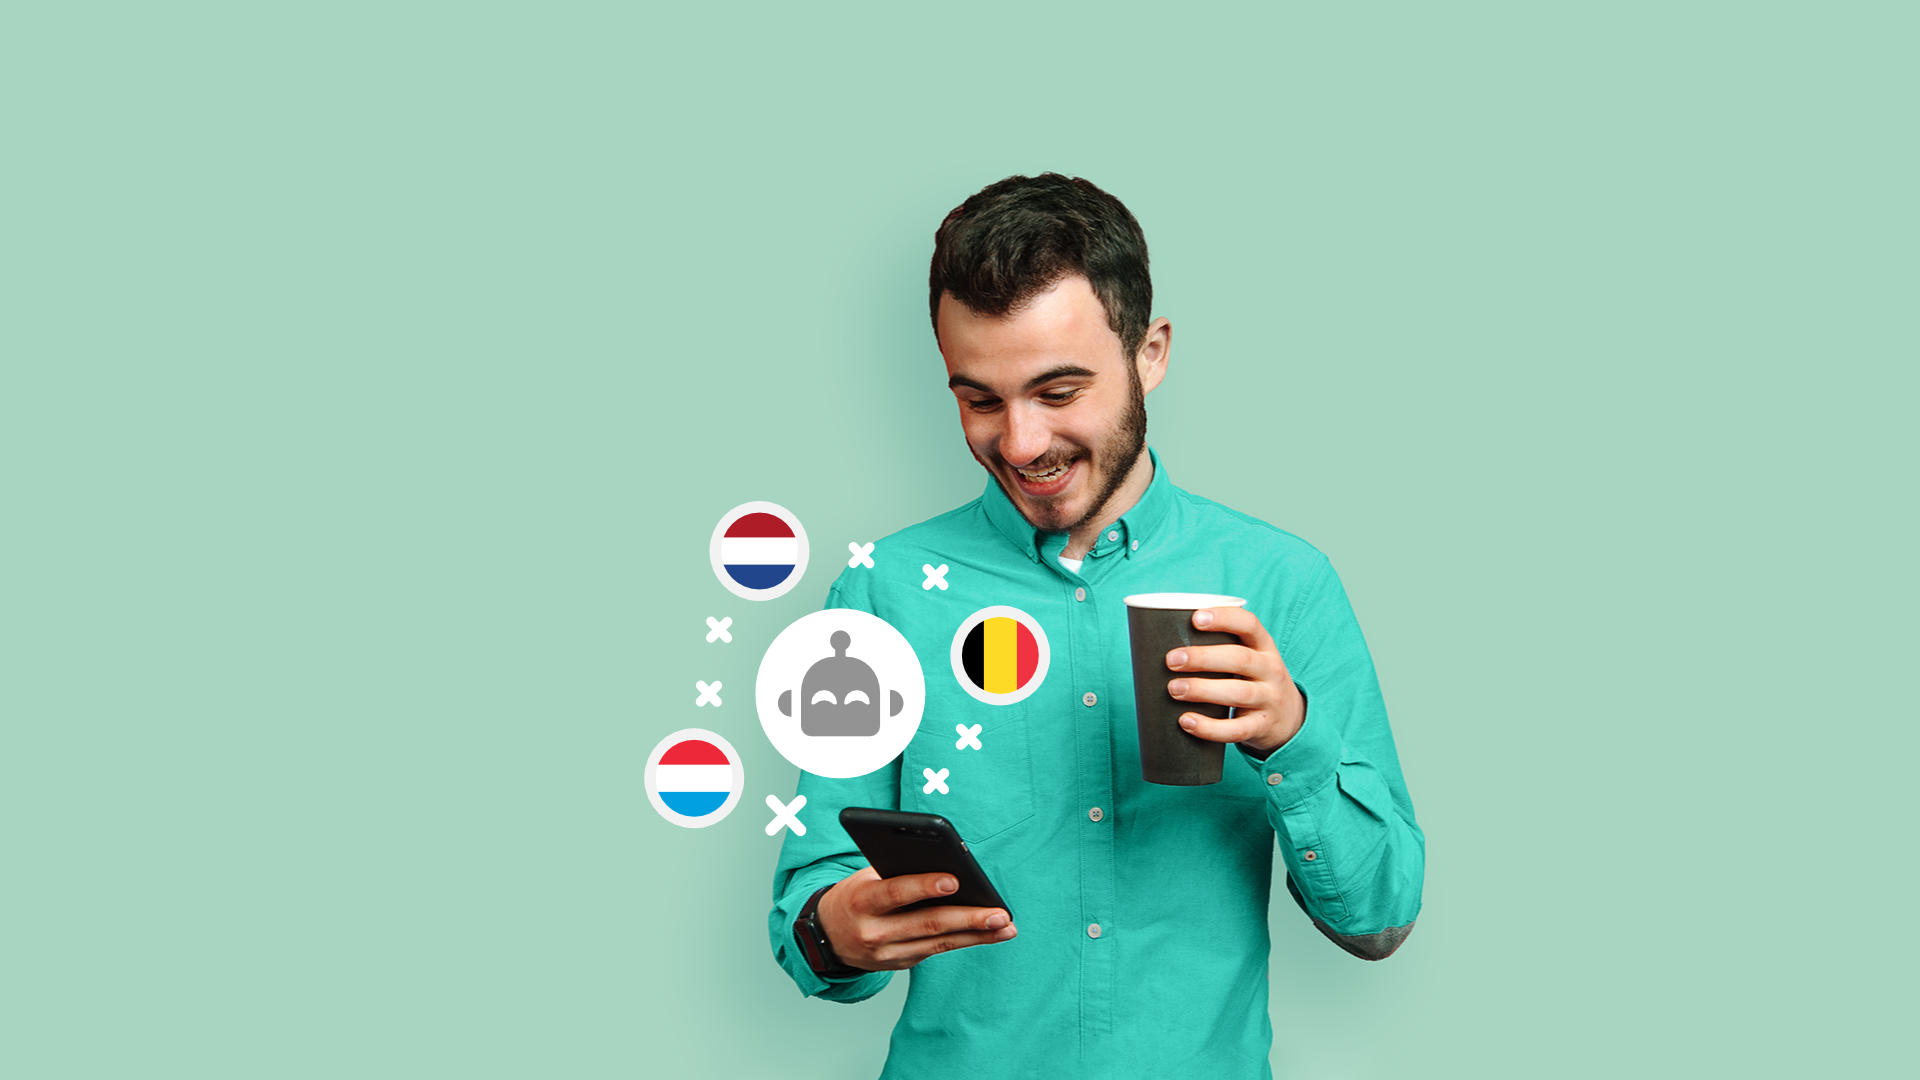 Chatbots in the Benelux Region: Statistics, Usage, and Trends